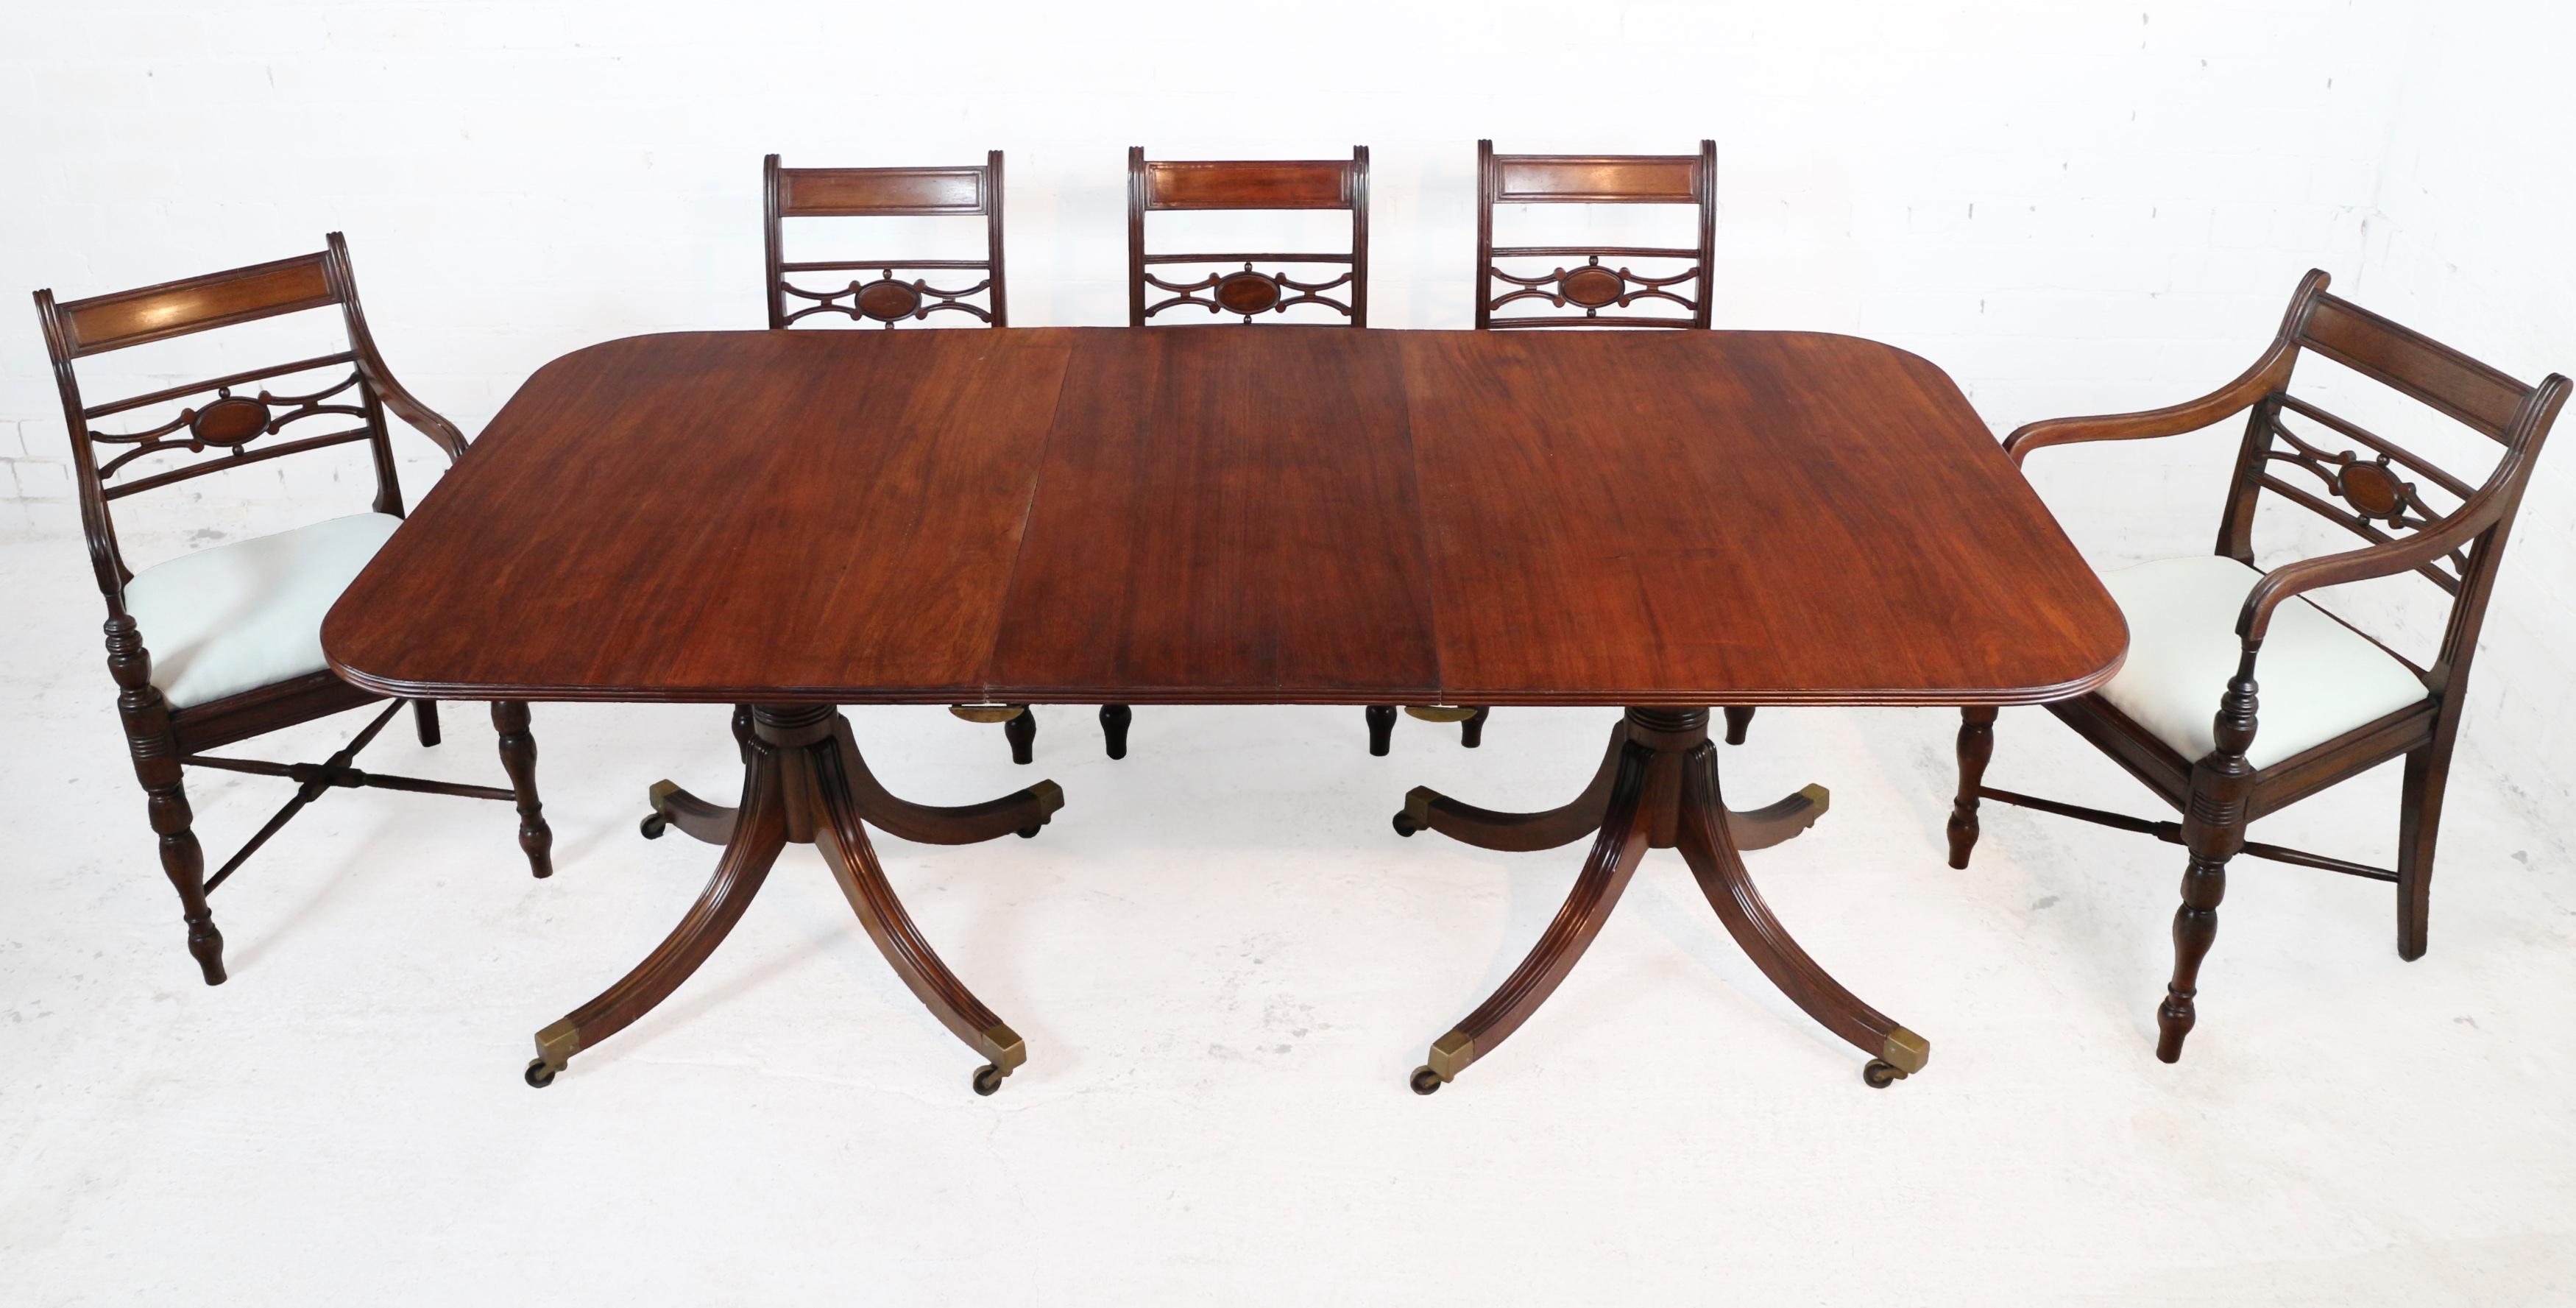 20th Century Regency Style Solid Mahogany Twin Pillar Dining Table/Pair Side Tables, Seats 8